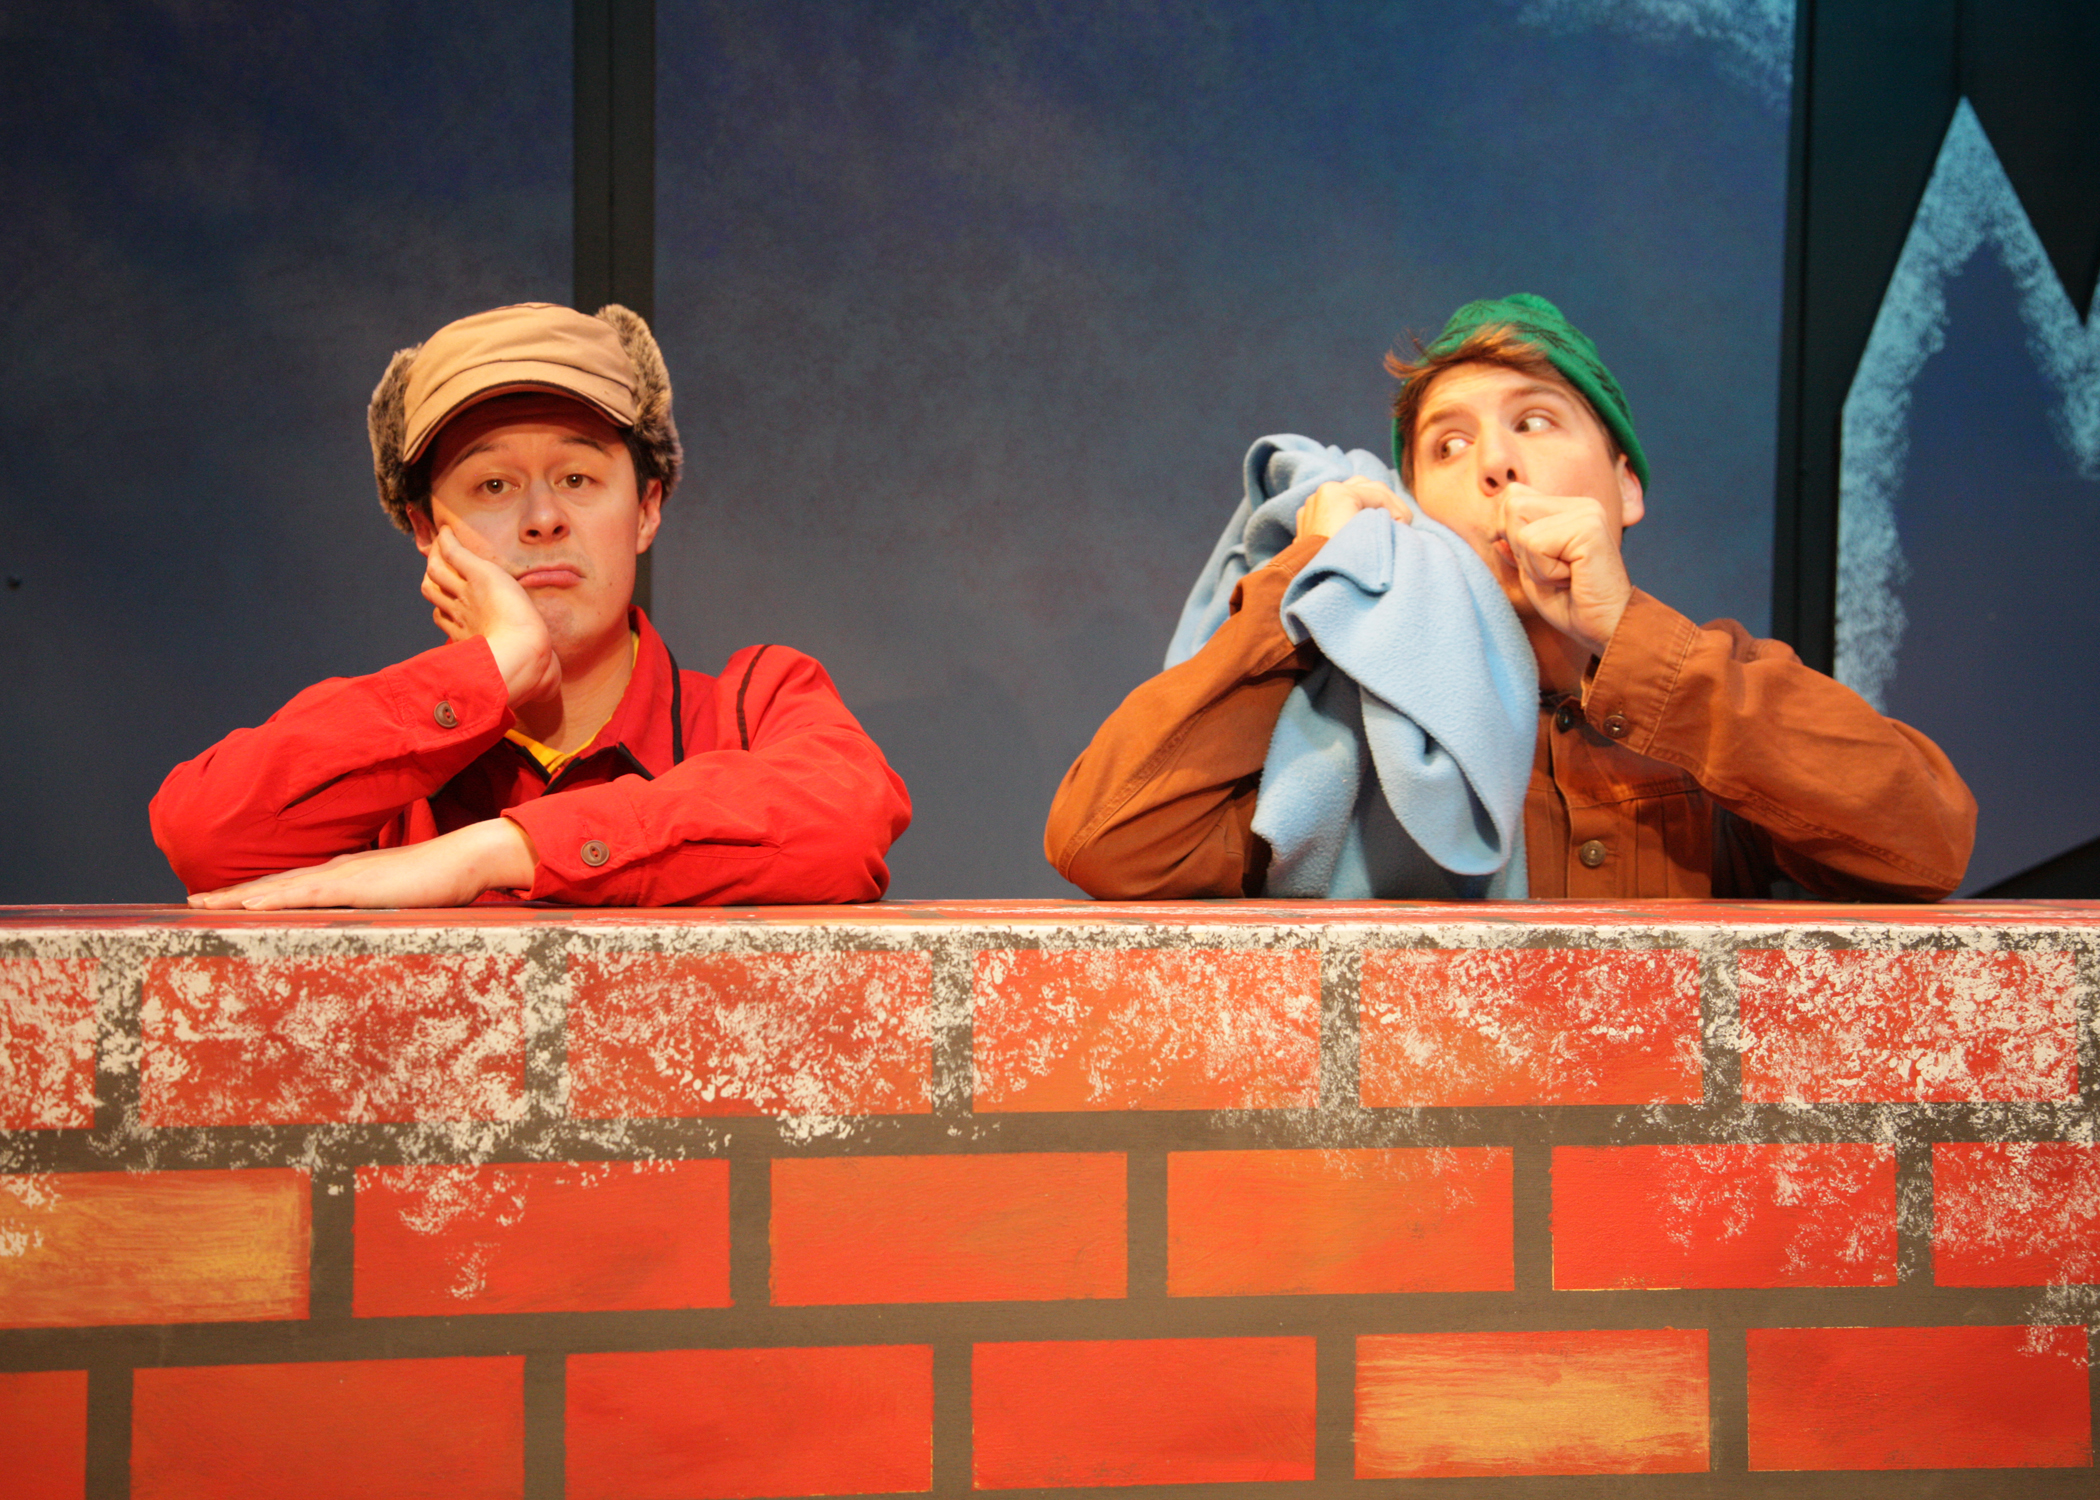 Matt Takahashi and Juston Gonzalez-Rodholm in the encore presentation of “A Charlie Brown Christmas.” This live version of Charles Schulz’s classic television special adapted by Eric Schaeffer and directed by James Michael McHale will run thru December 19, 2021 on the Fyda-Mar Stage at the Bette Aitken theater arts Center.